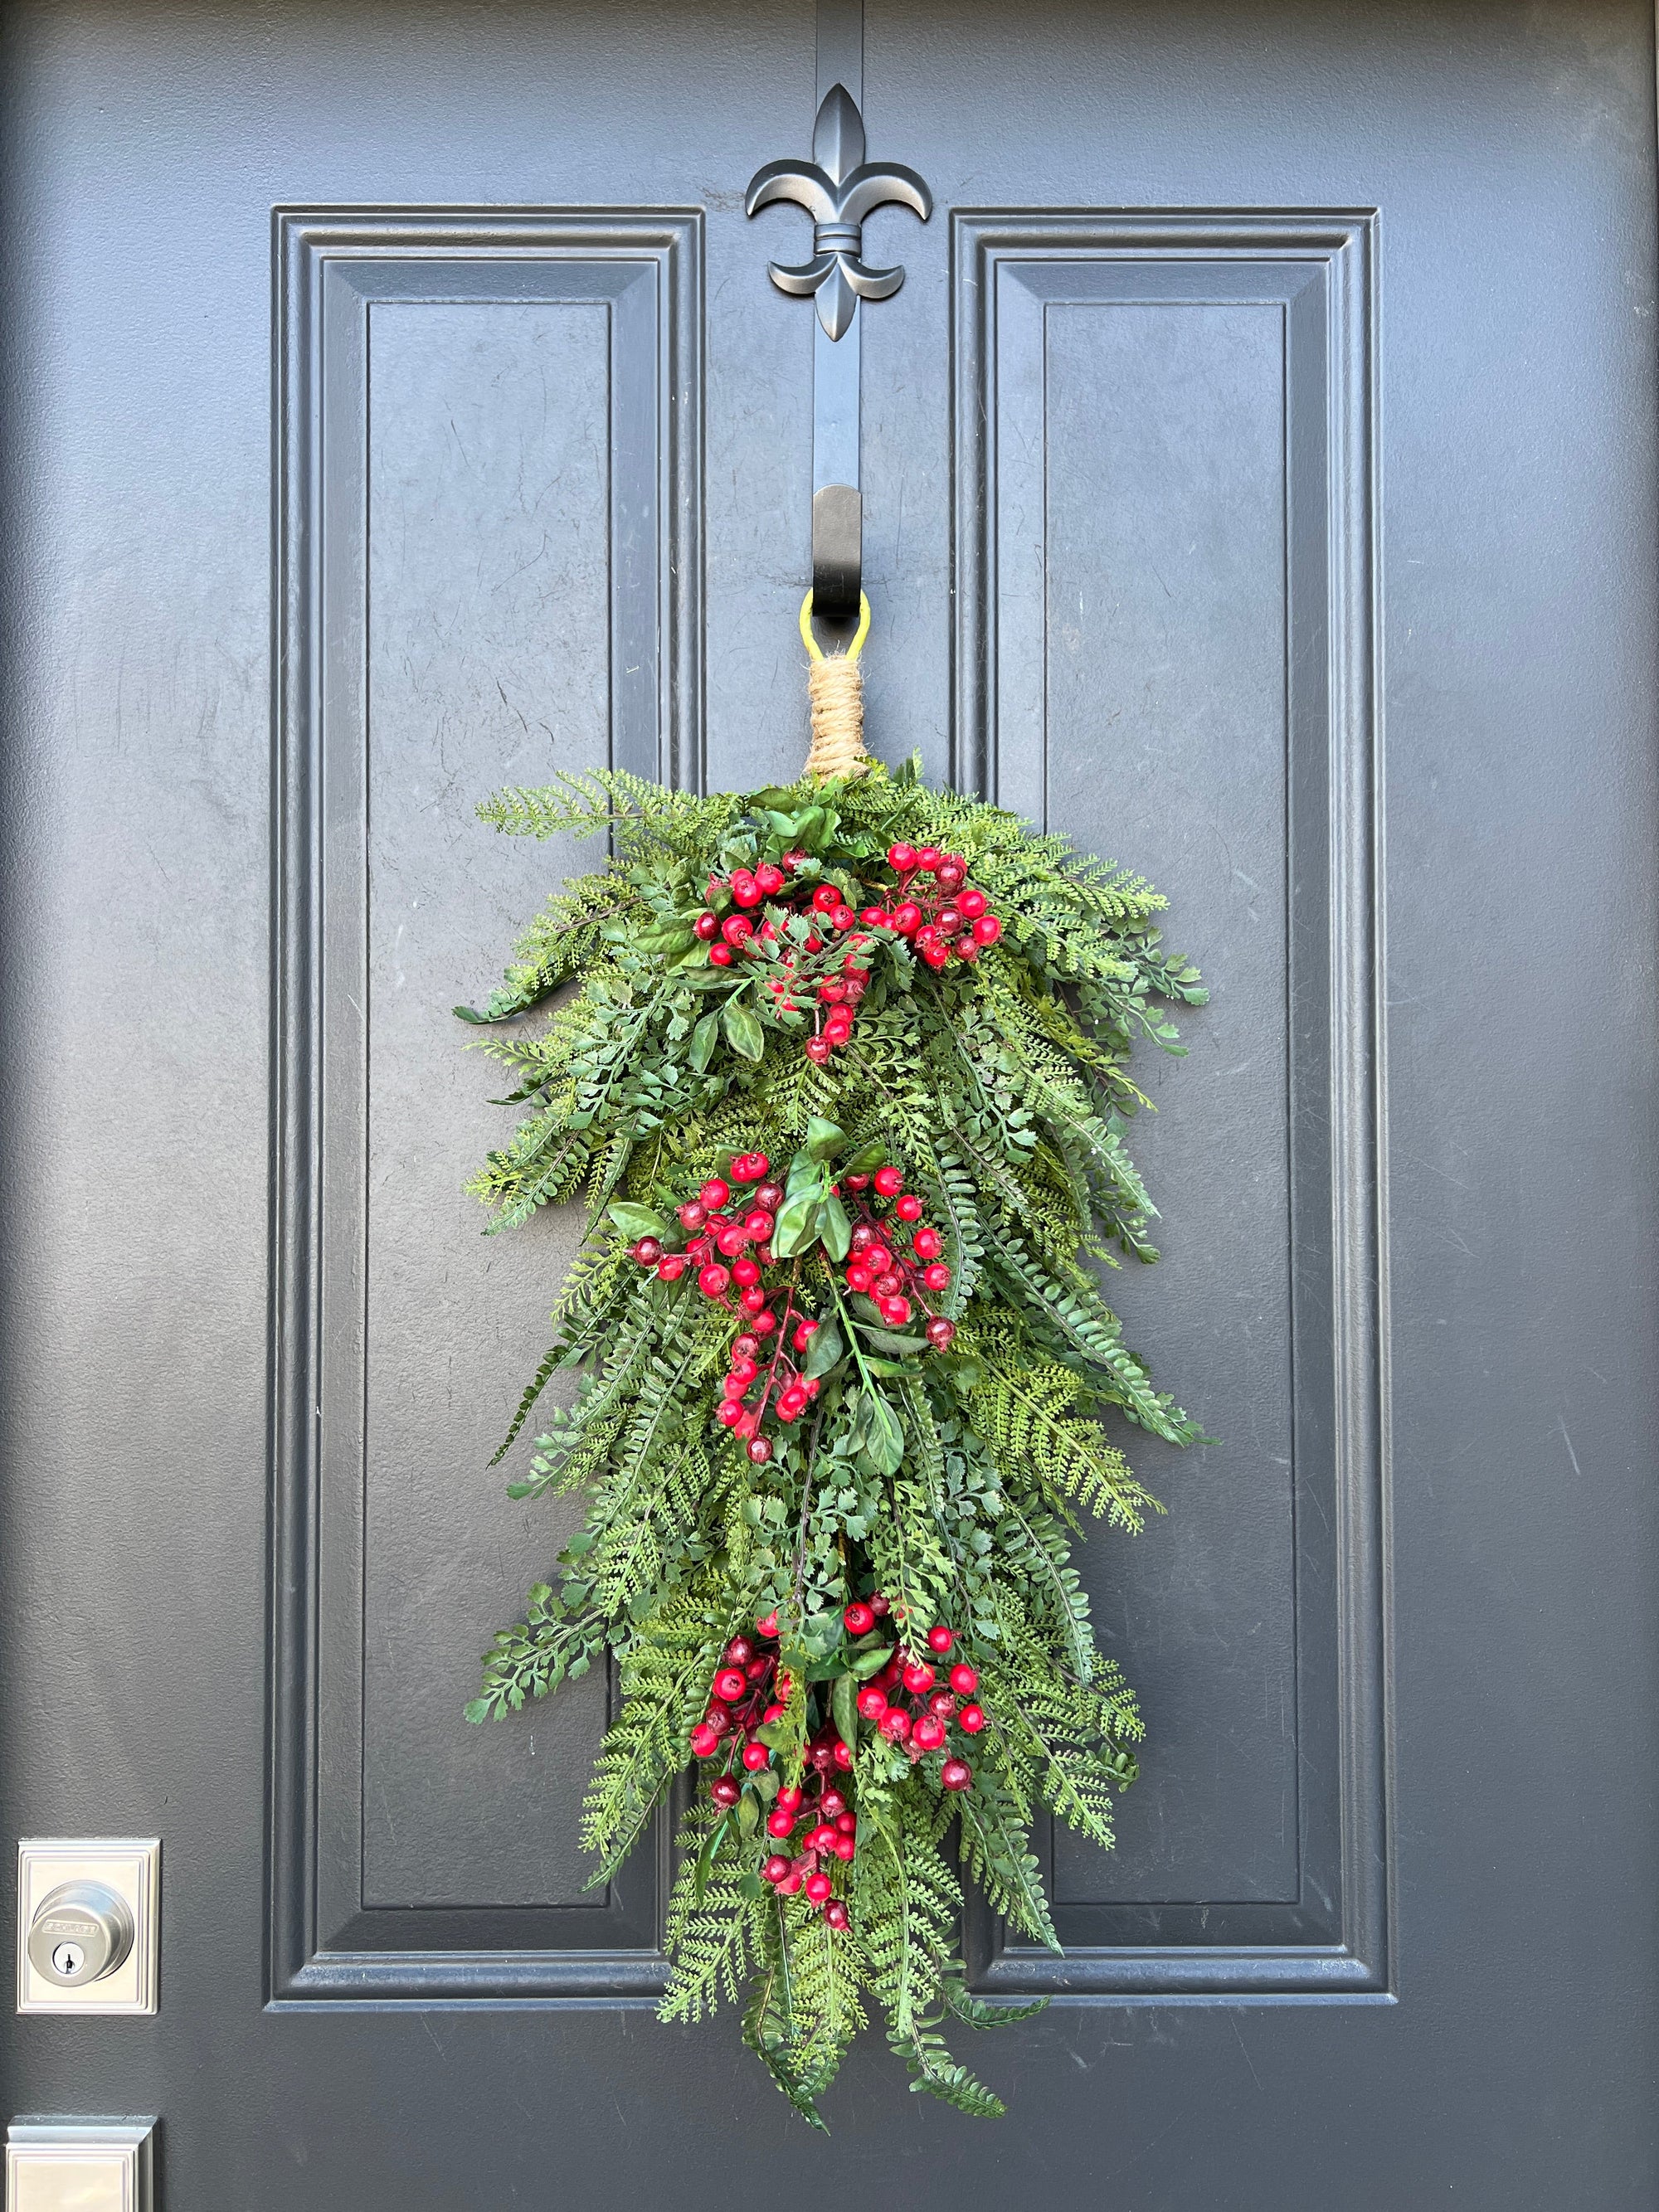 Outdoor Christmas Fern Teardrop Wreath with Red Berries - Ready to Ship